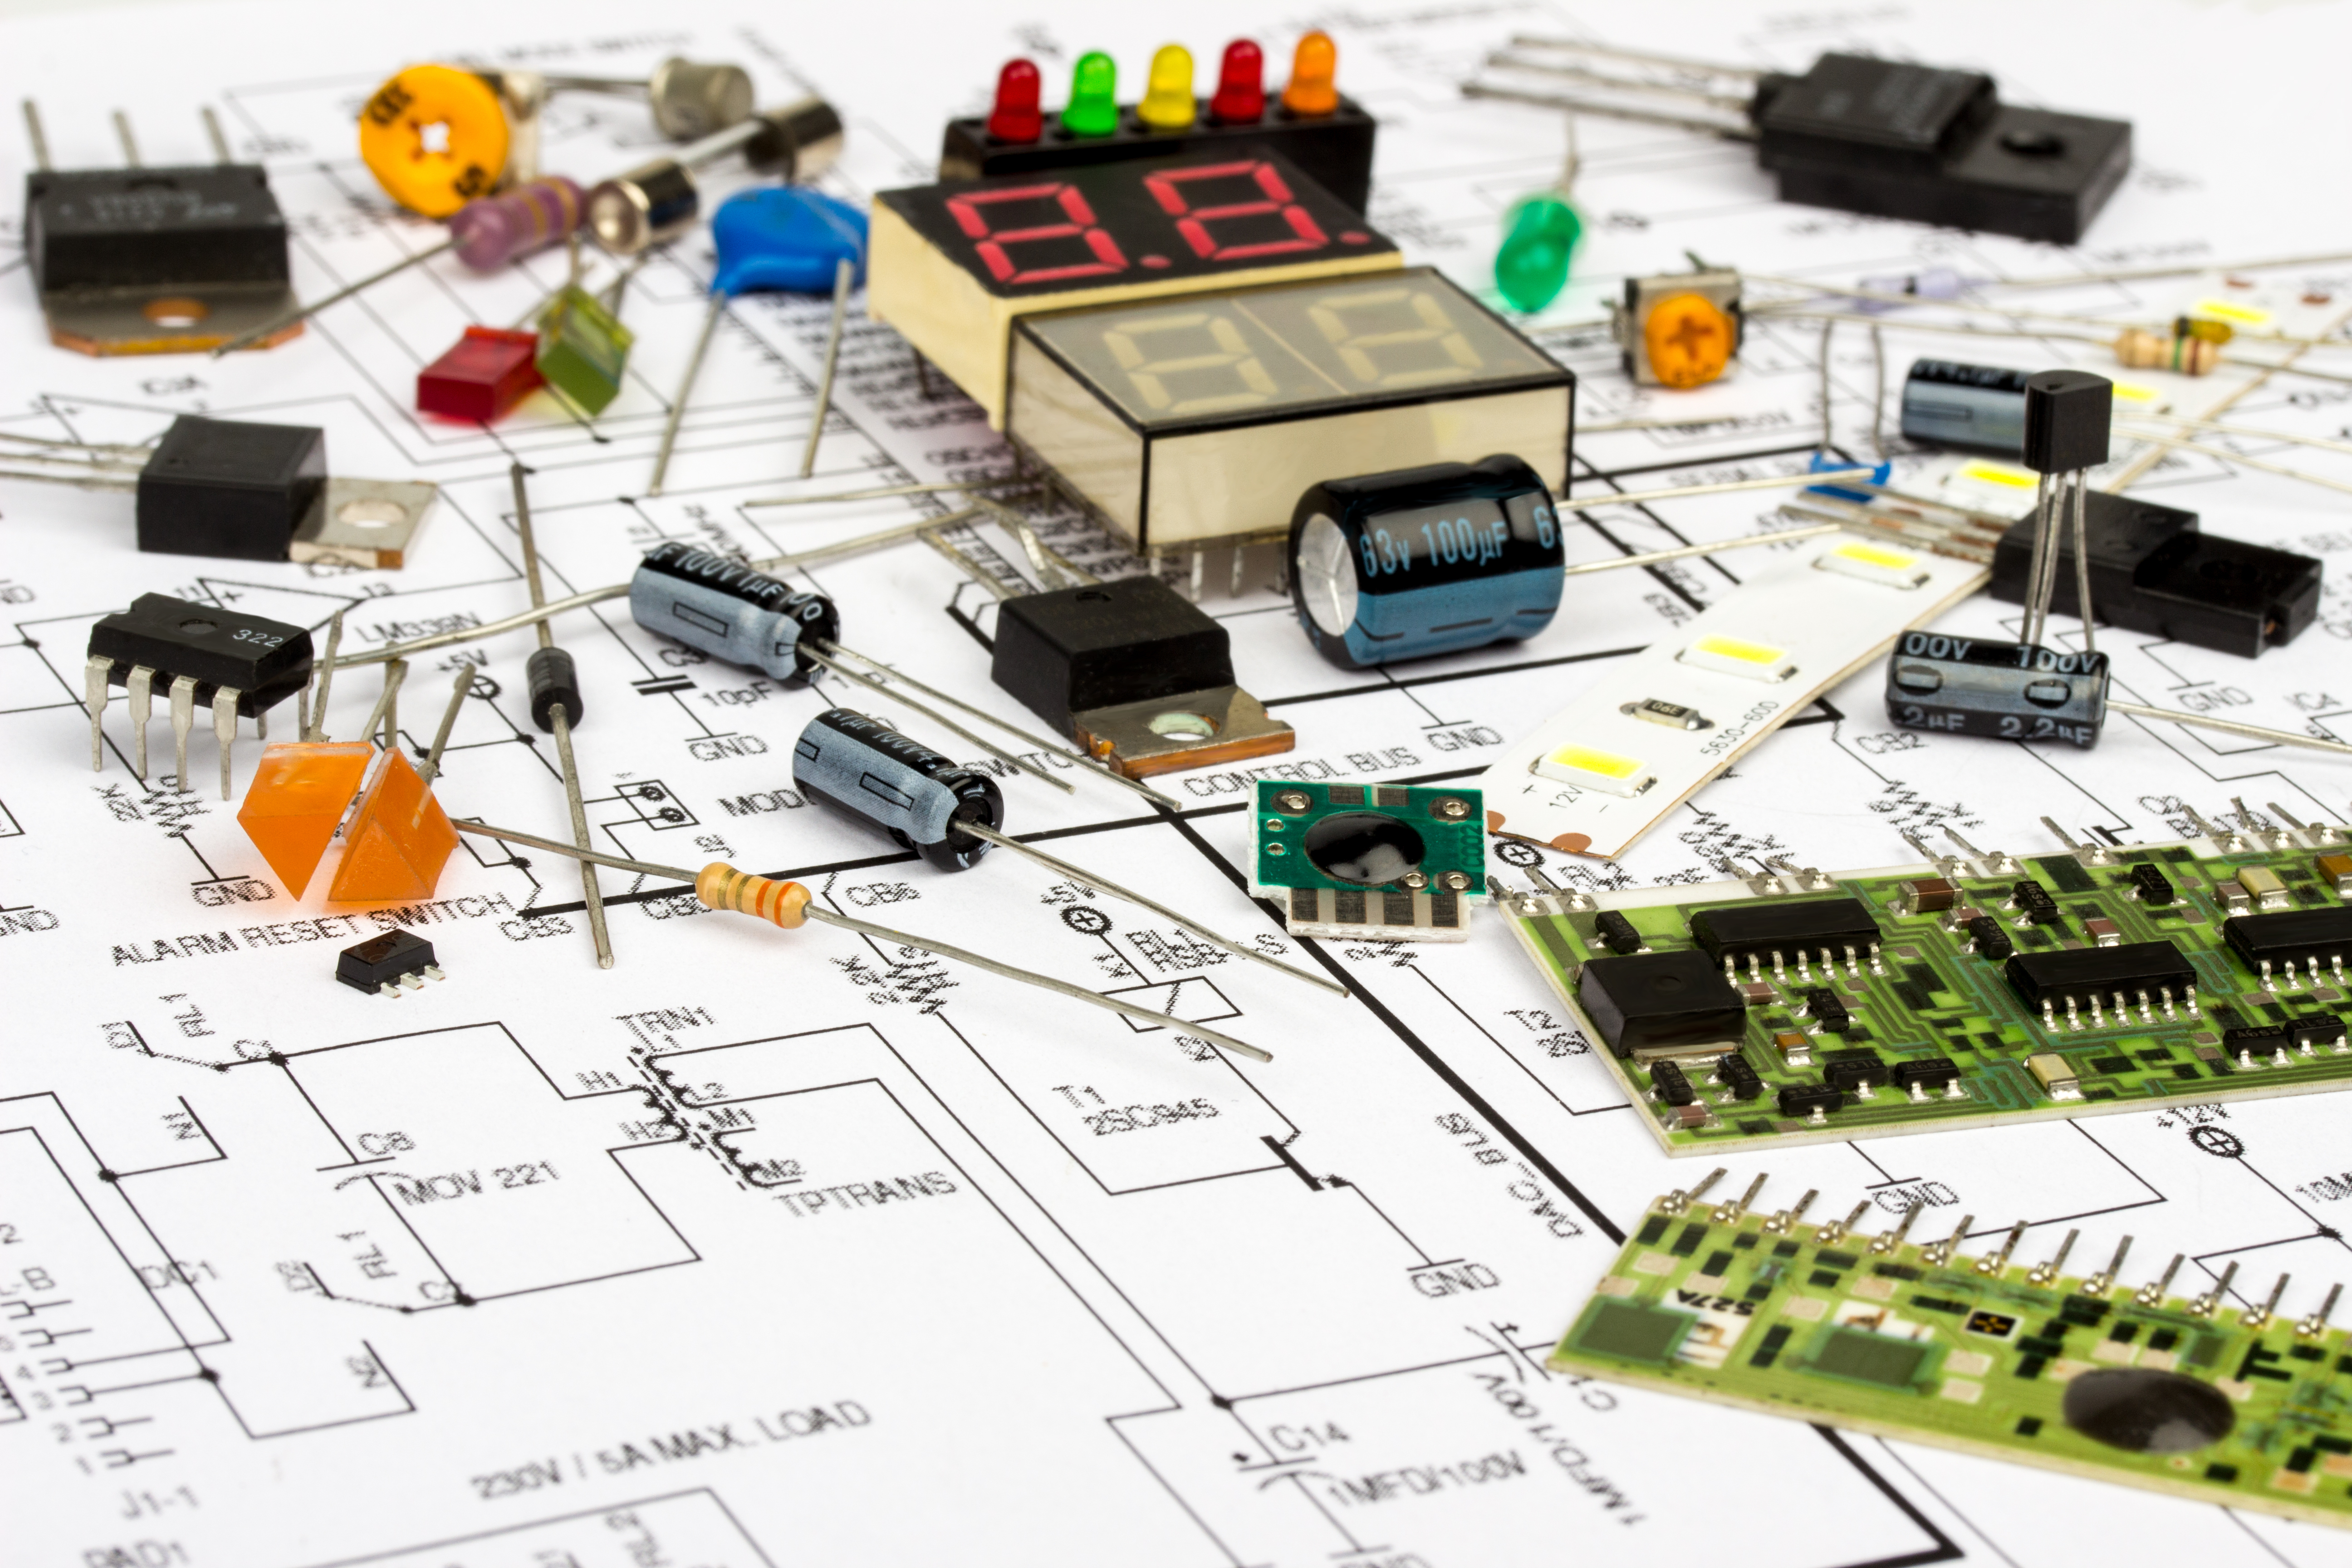 Electrical / Electronic Component